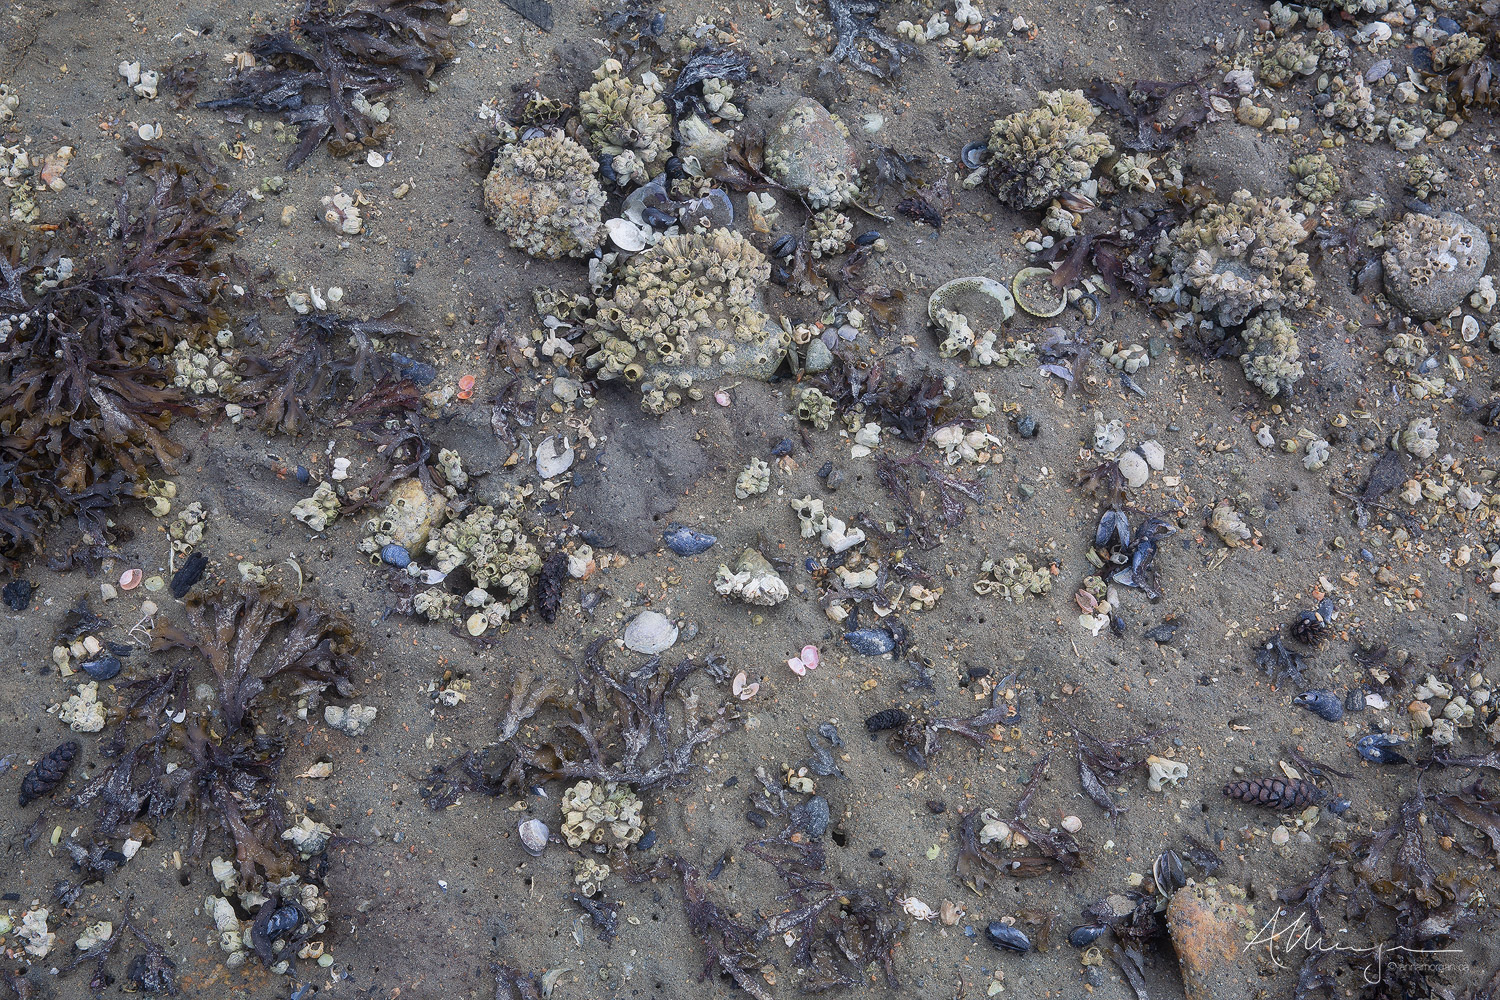 The intertidal zone on a sand beach, with shells, seaweed, barnacles and pine cones.